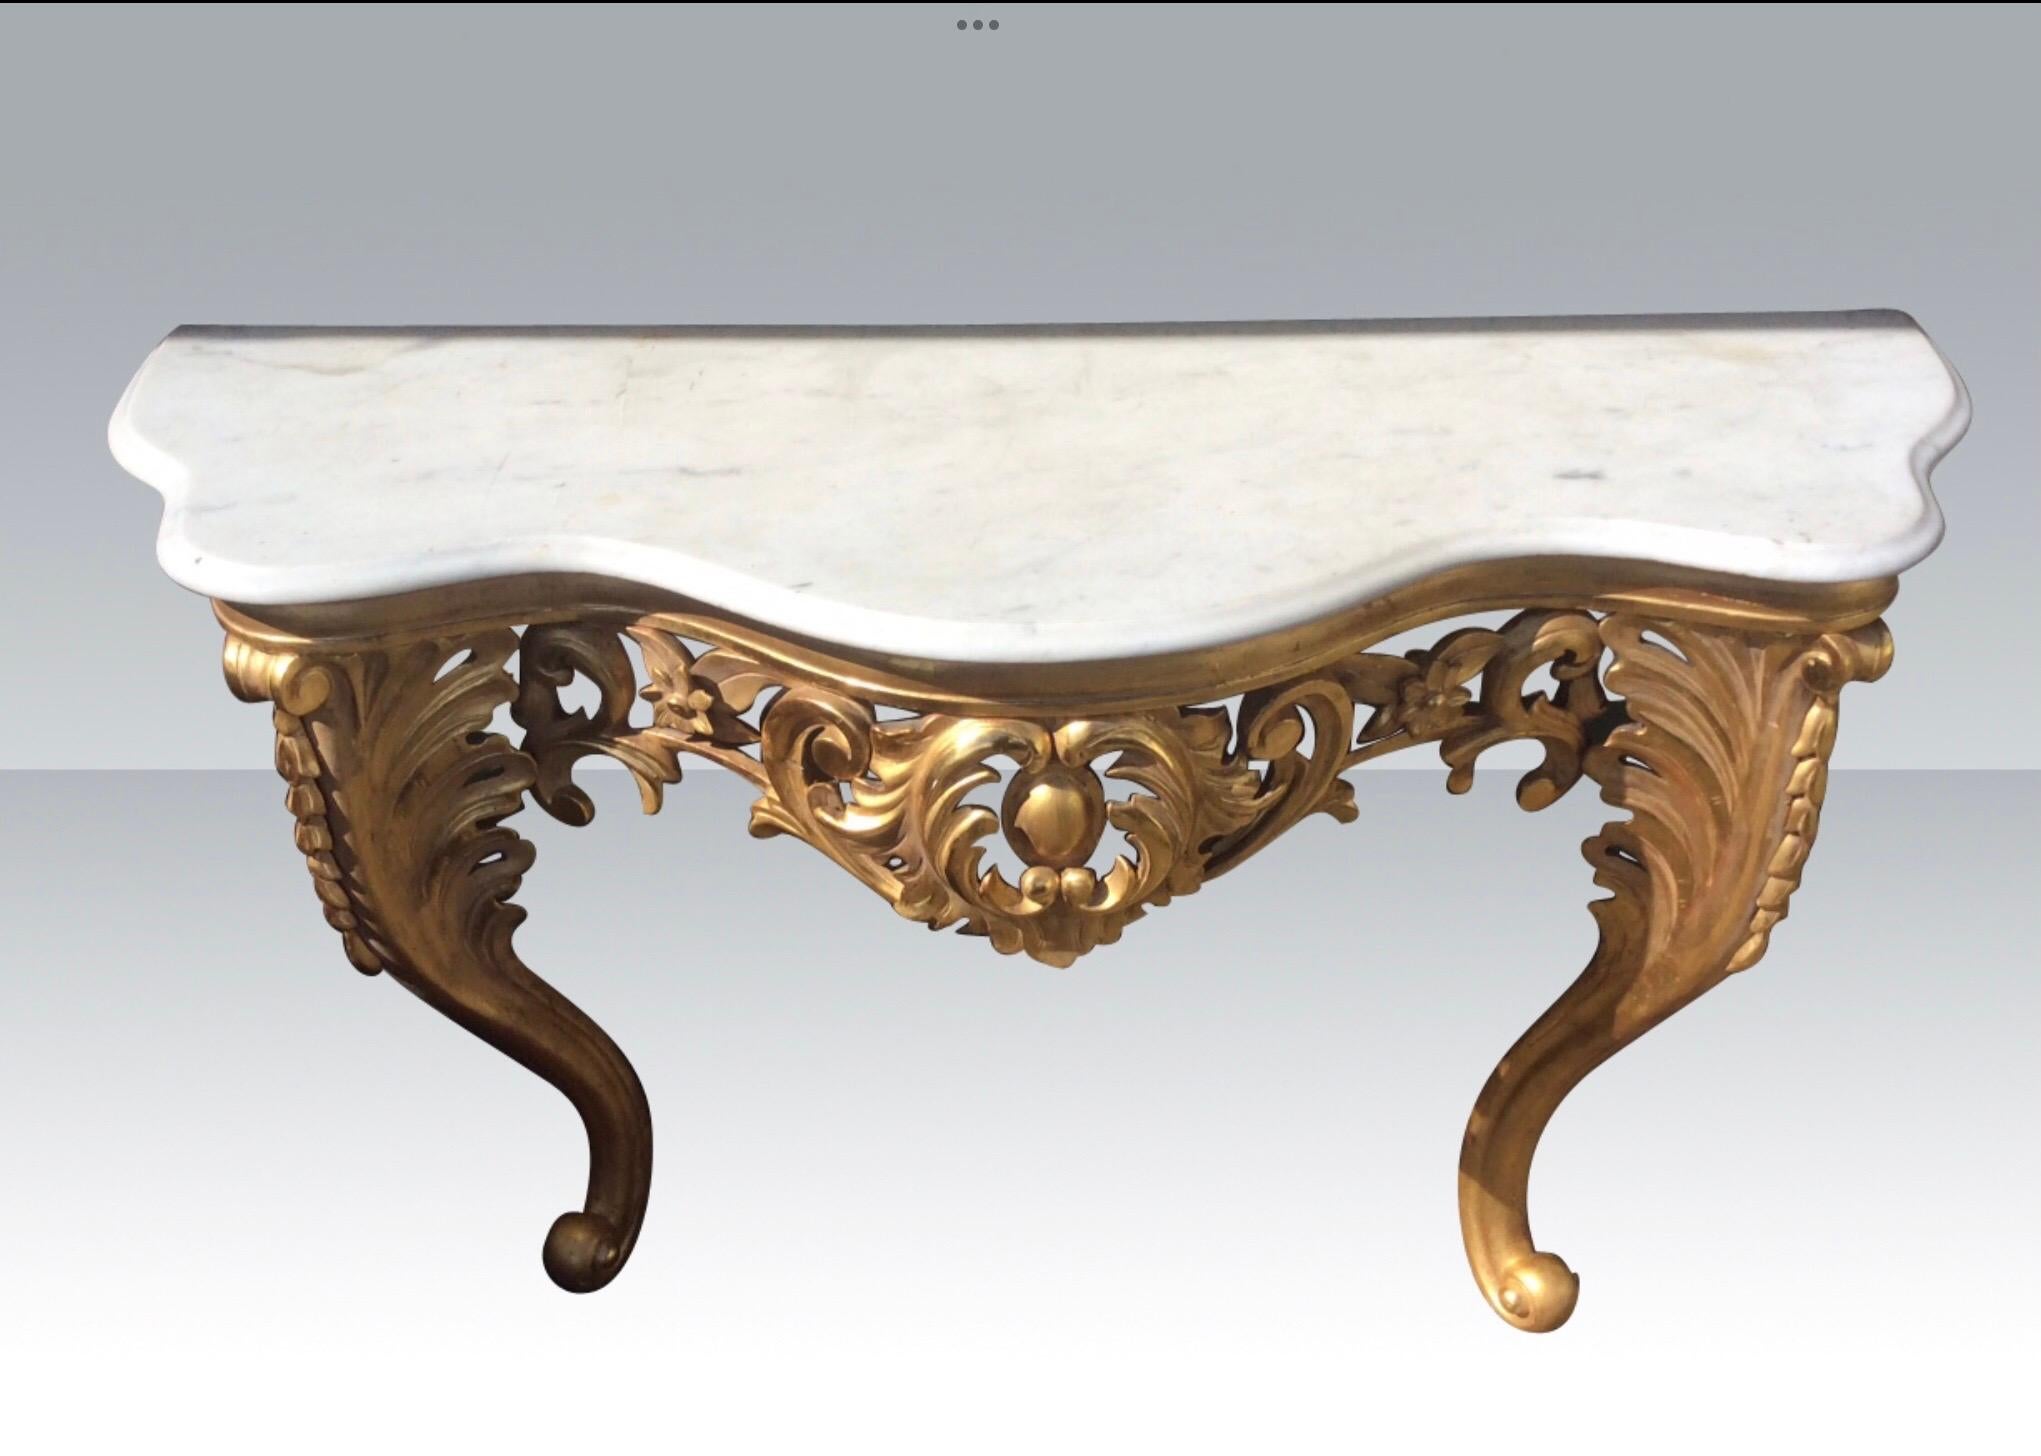 Superb quality antique gilt wood carved console side table with Serpentined shaped white carrera marble top.
Excellent Condition.
Circa 1850
Measures: 55ins wide x 34ins high x 20ins Deep
(140cm x 86.5cm x 51cm deep).